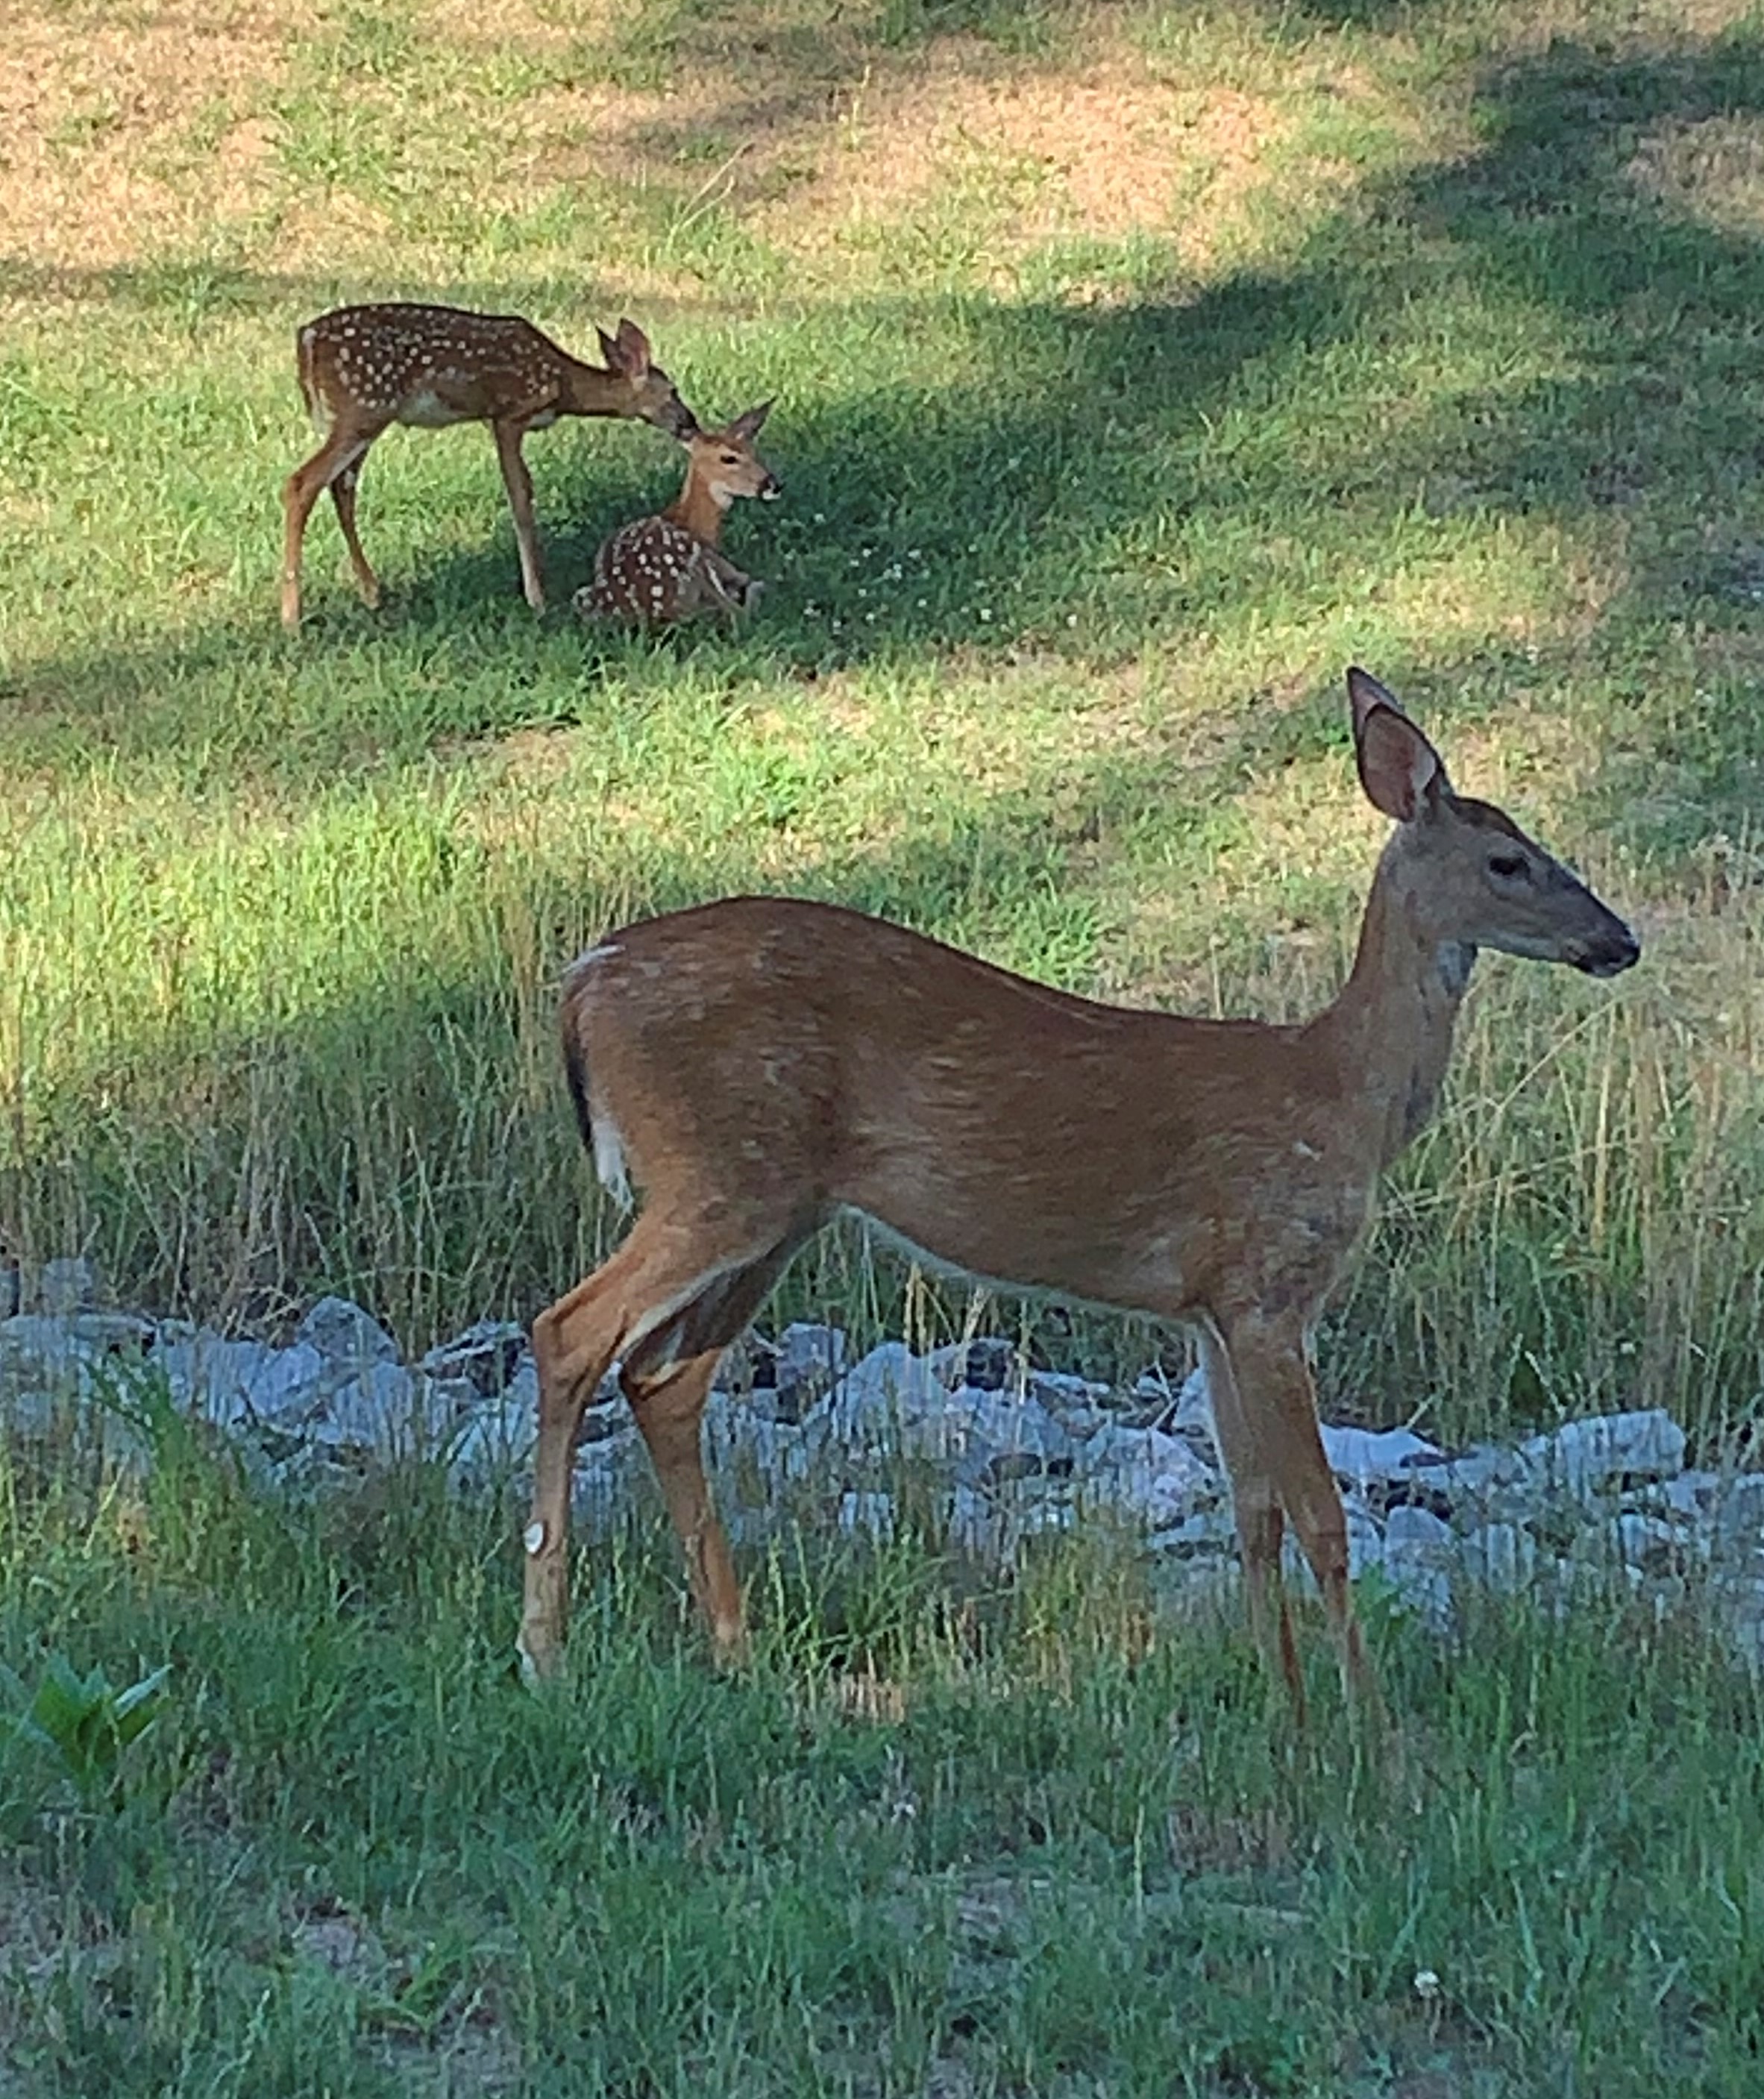 Momma deer with her babies cleaning each other